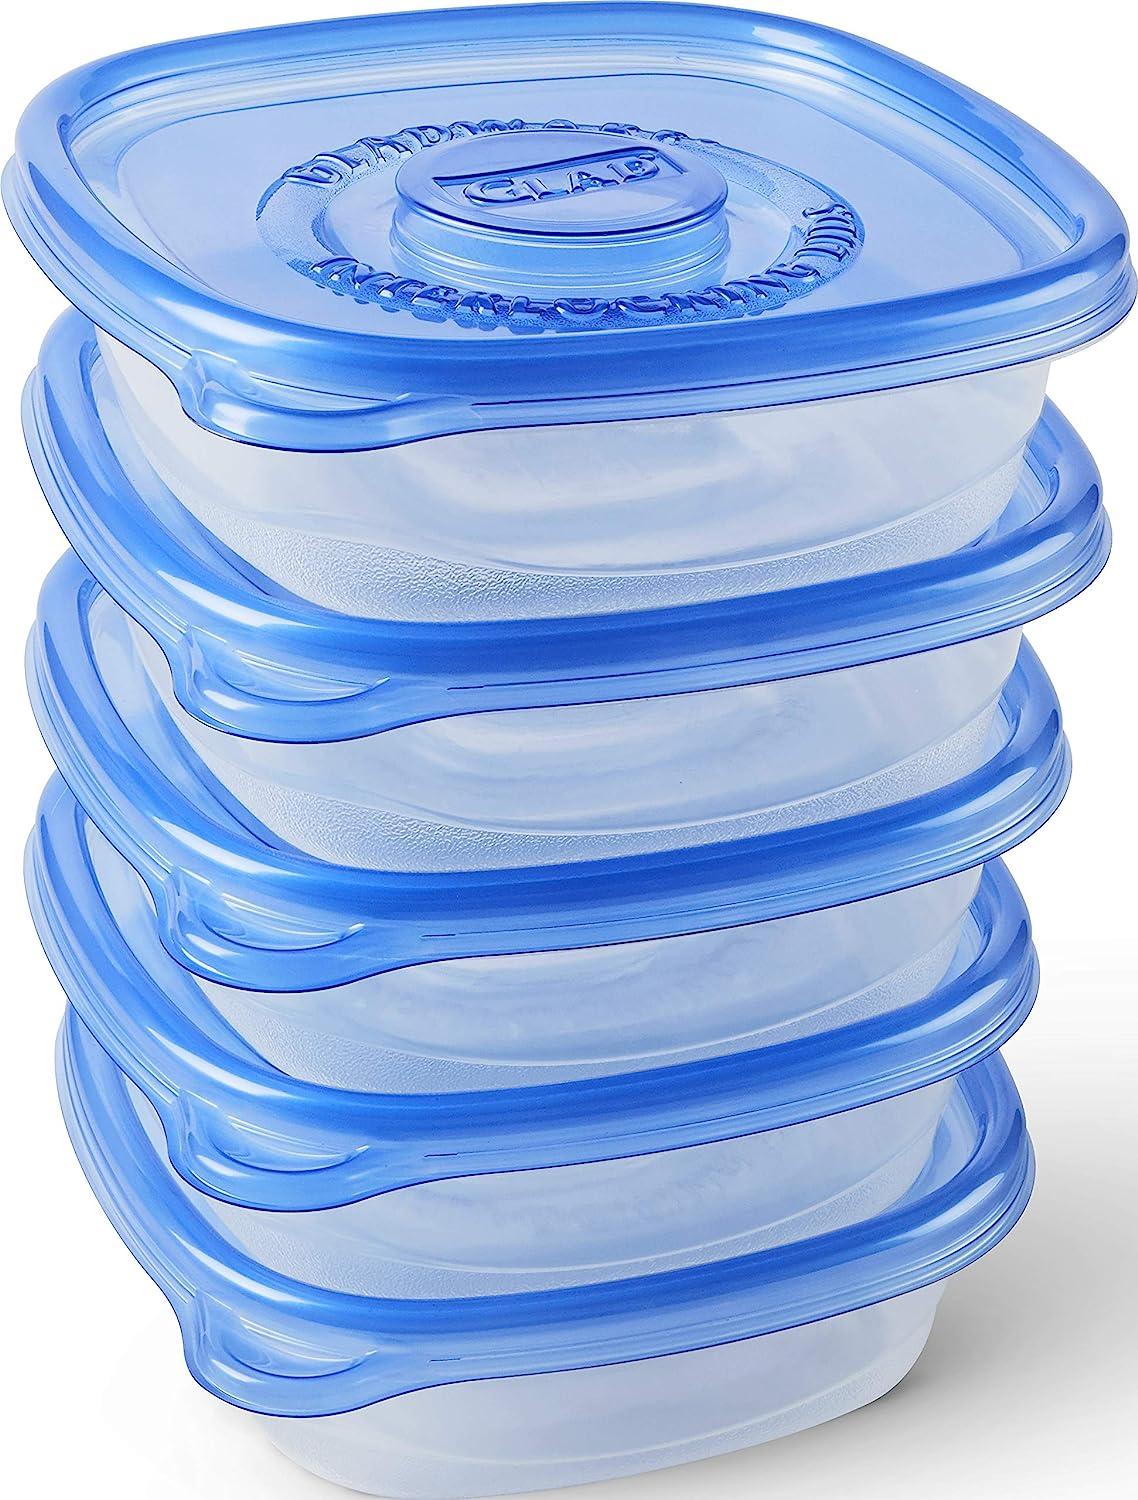 GladWare Food Storage Containers, Lunch Variety Pack, 25 Count Set | With  Glad Lock Tight Seal, BPA Free Containers and Lids in a Variety of Sizes to